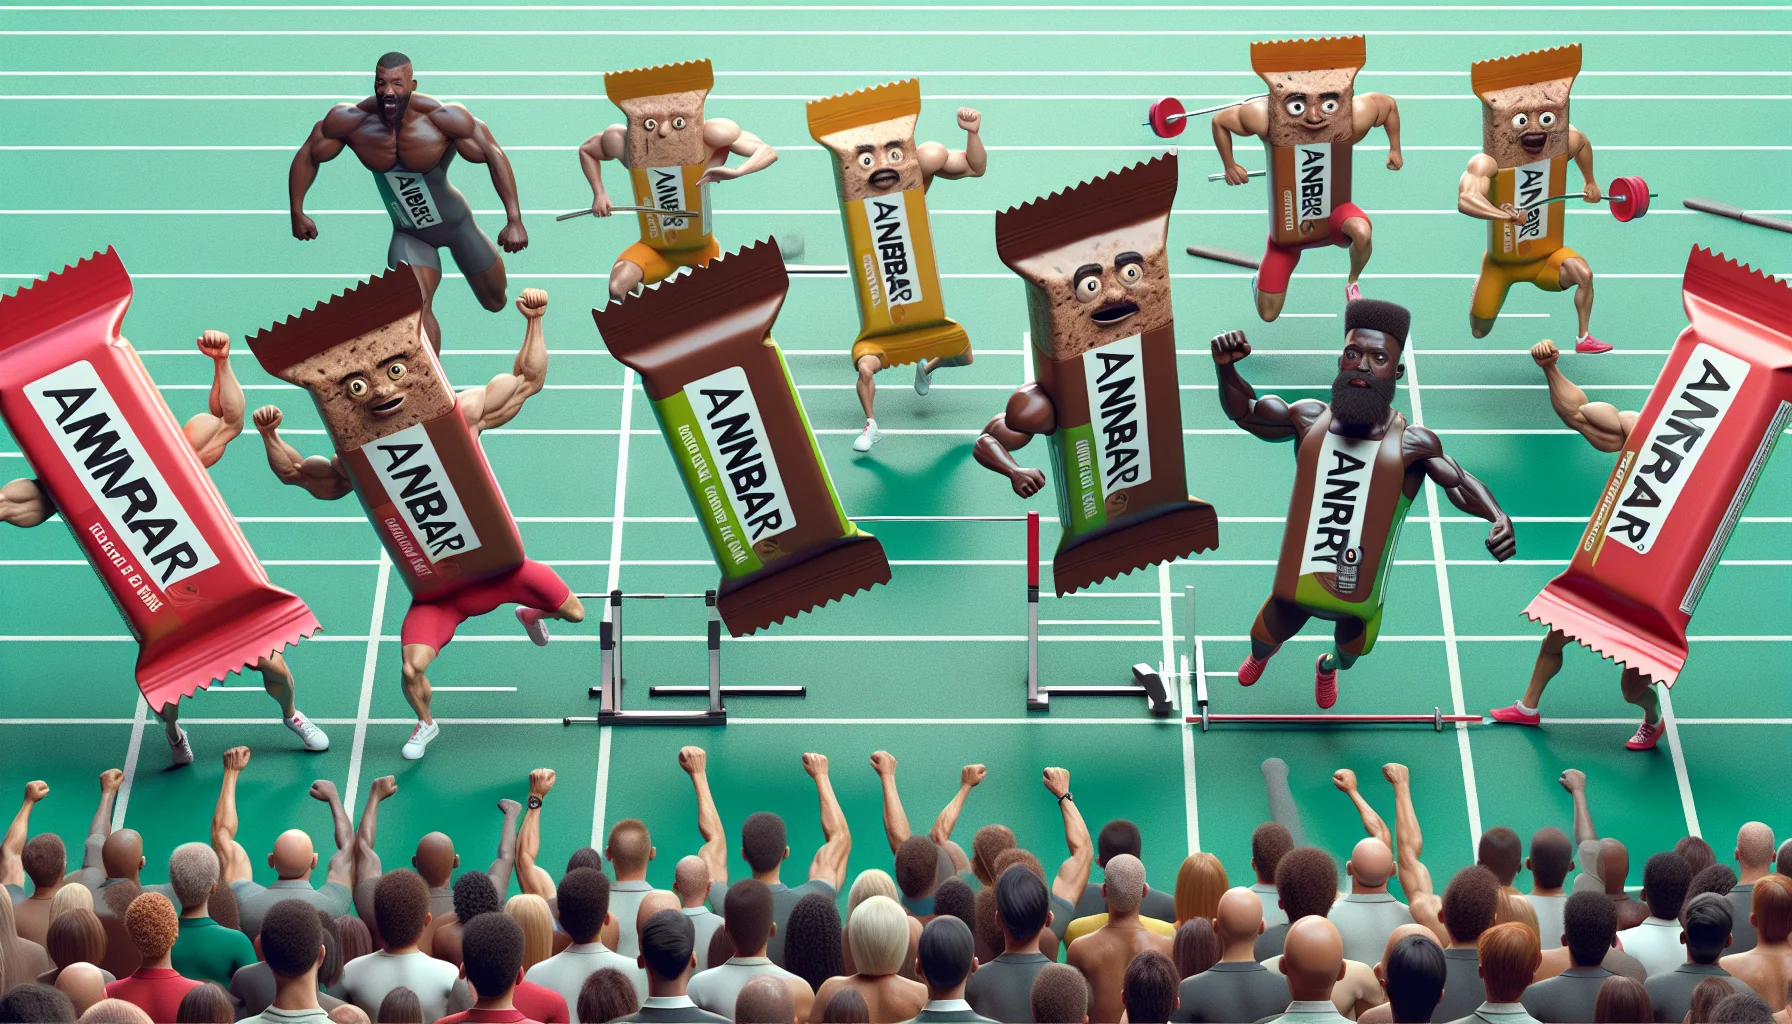 Humorous and realistic image of an athletic event where the participants are not typical athletes, but anabar protein bars. They are depicted with cartoonish arms and legs, participating in various activities such as weightlifting, sprinting and long jump. Emphasize the surreal but fun atmosphere to highlight the idea of using supplements for sports. Make the surrounding crowd made up of diverse men and women, encompassing a variety of descents like African, Caucasian, Hispanic, Middle-Eastern and Asian, cheering enthusiastically.